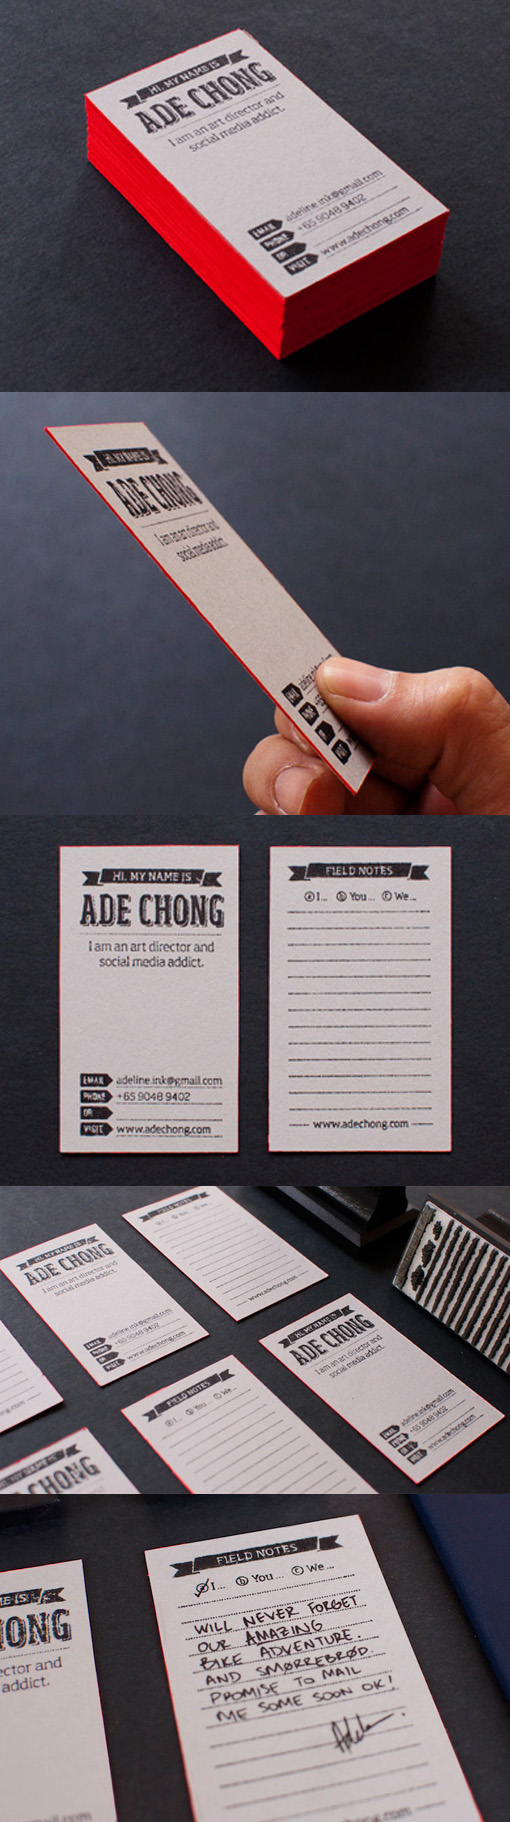 Interactive DIY Hand Stamped And Edge Painted Business Card